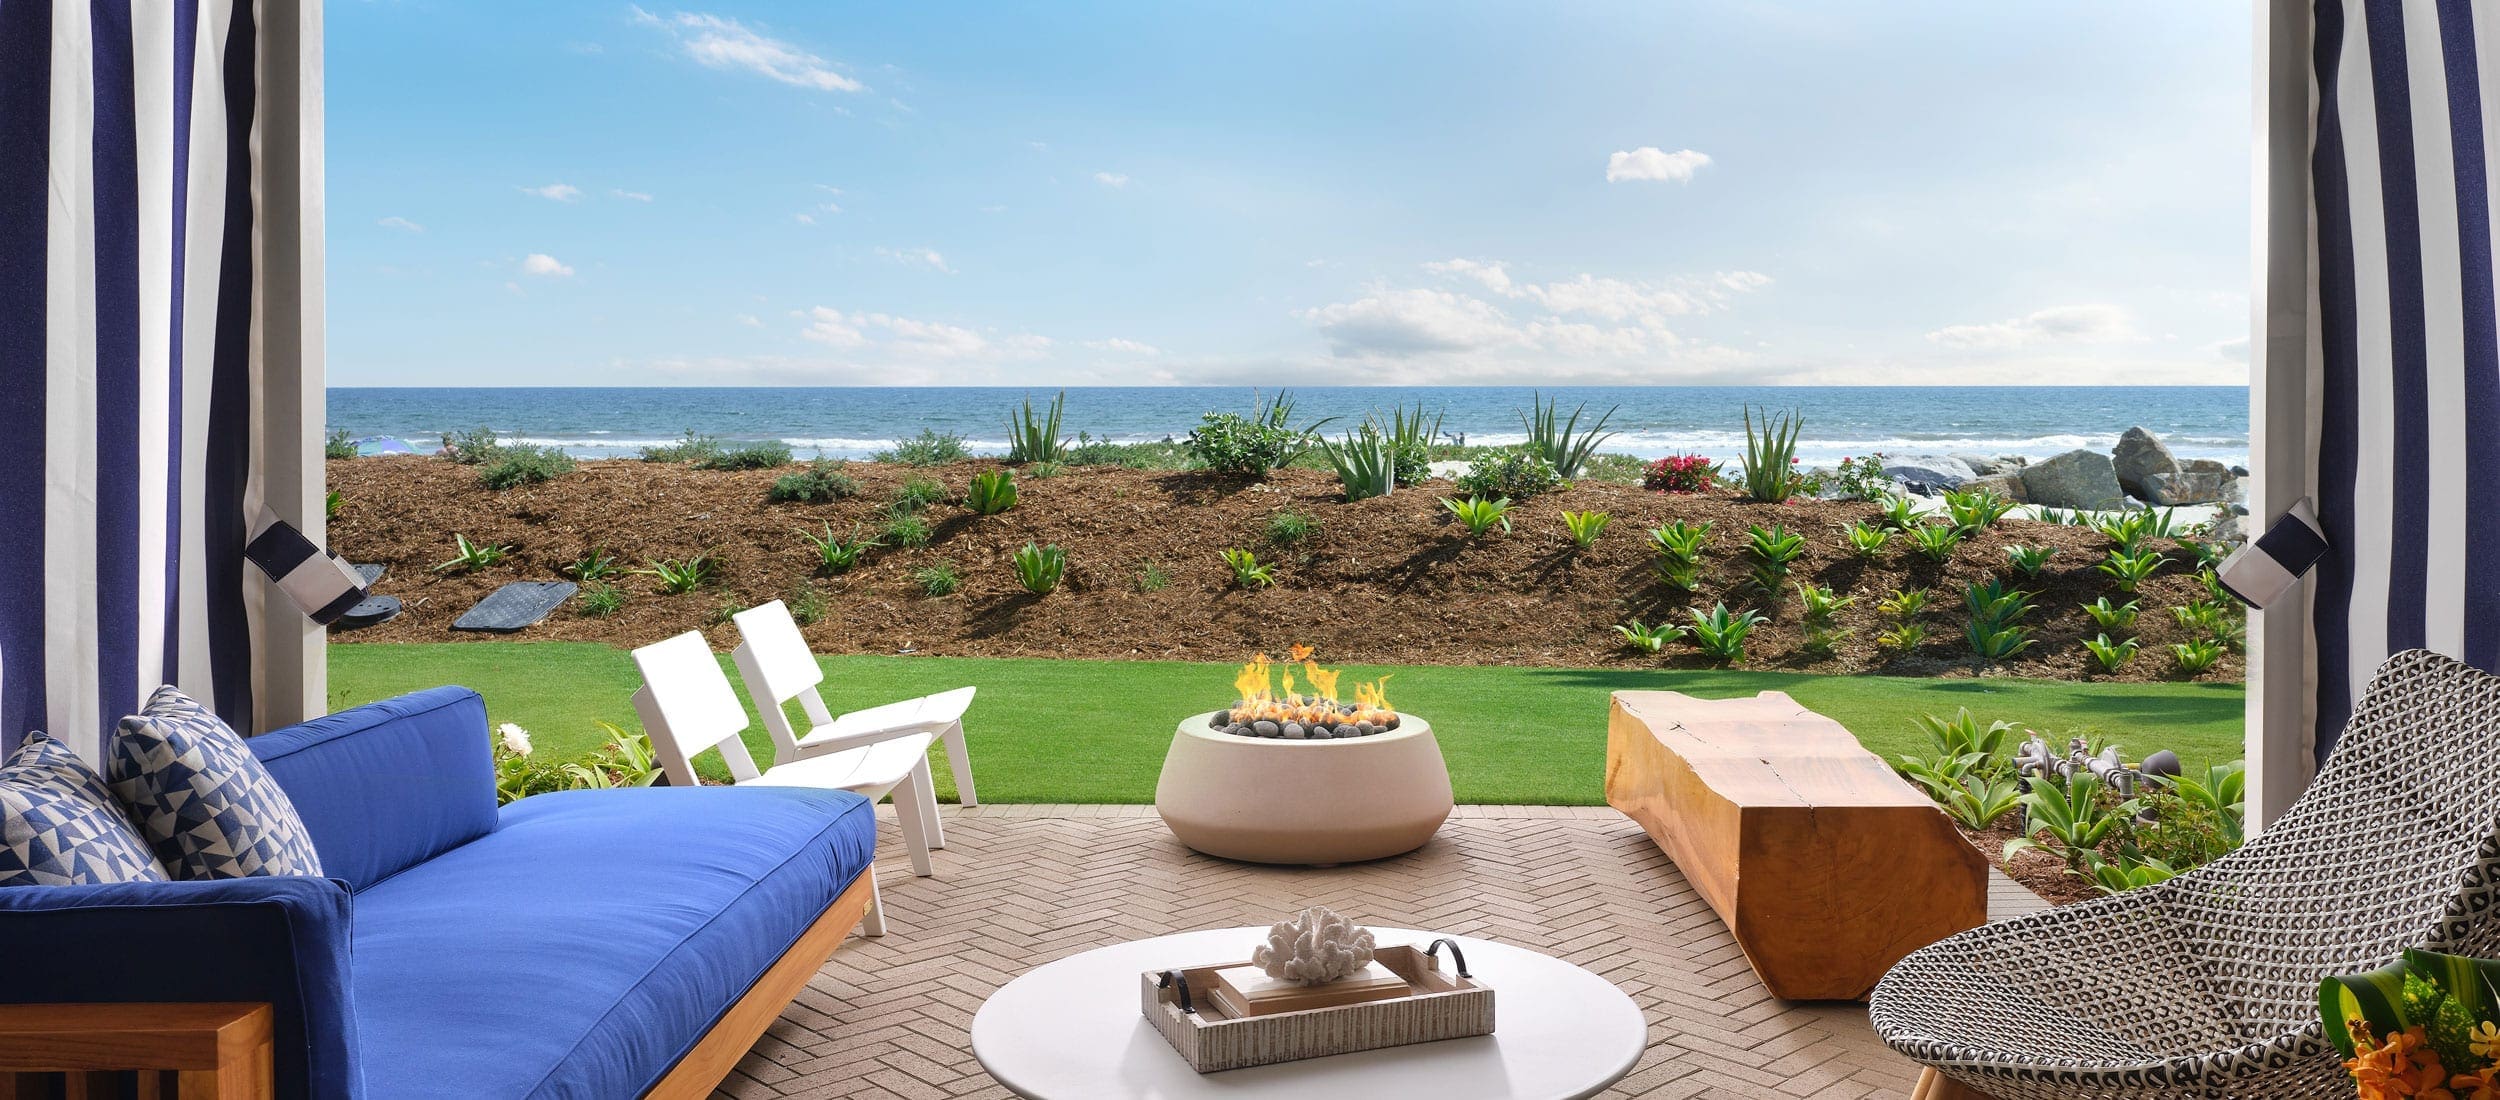 the views beachside terrace with fire pit